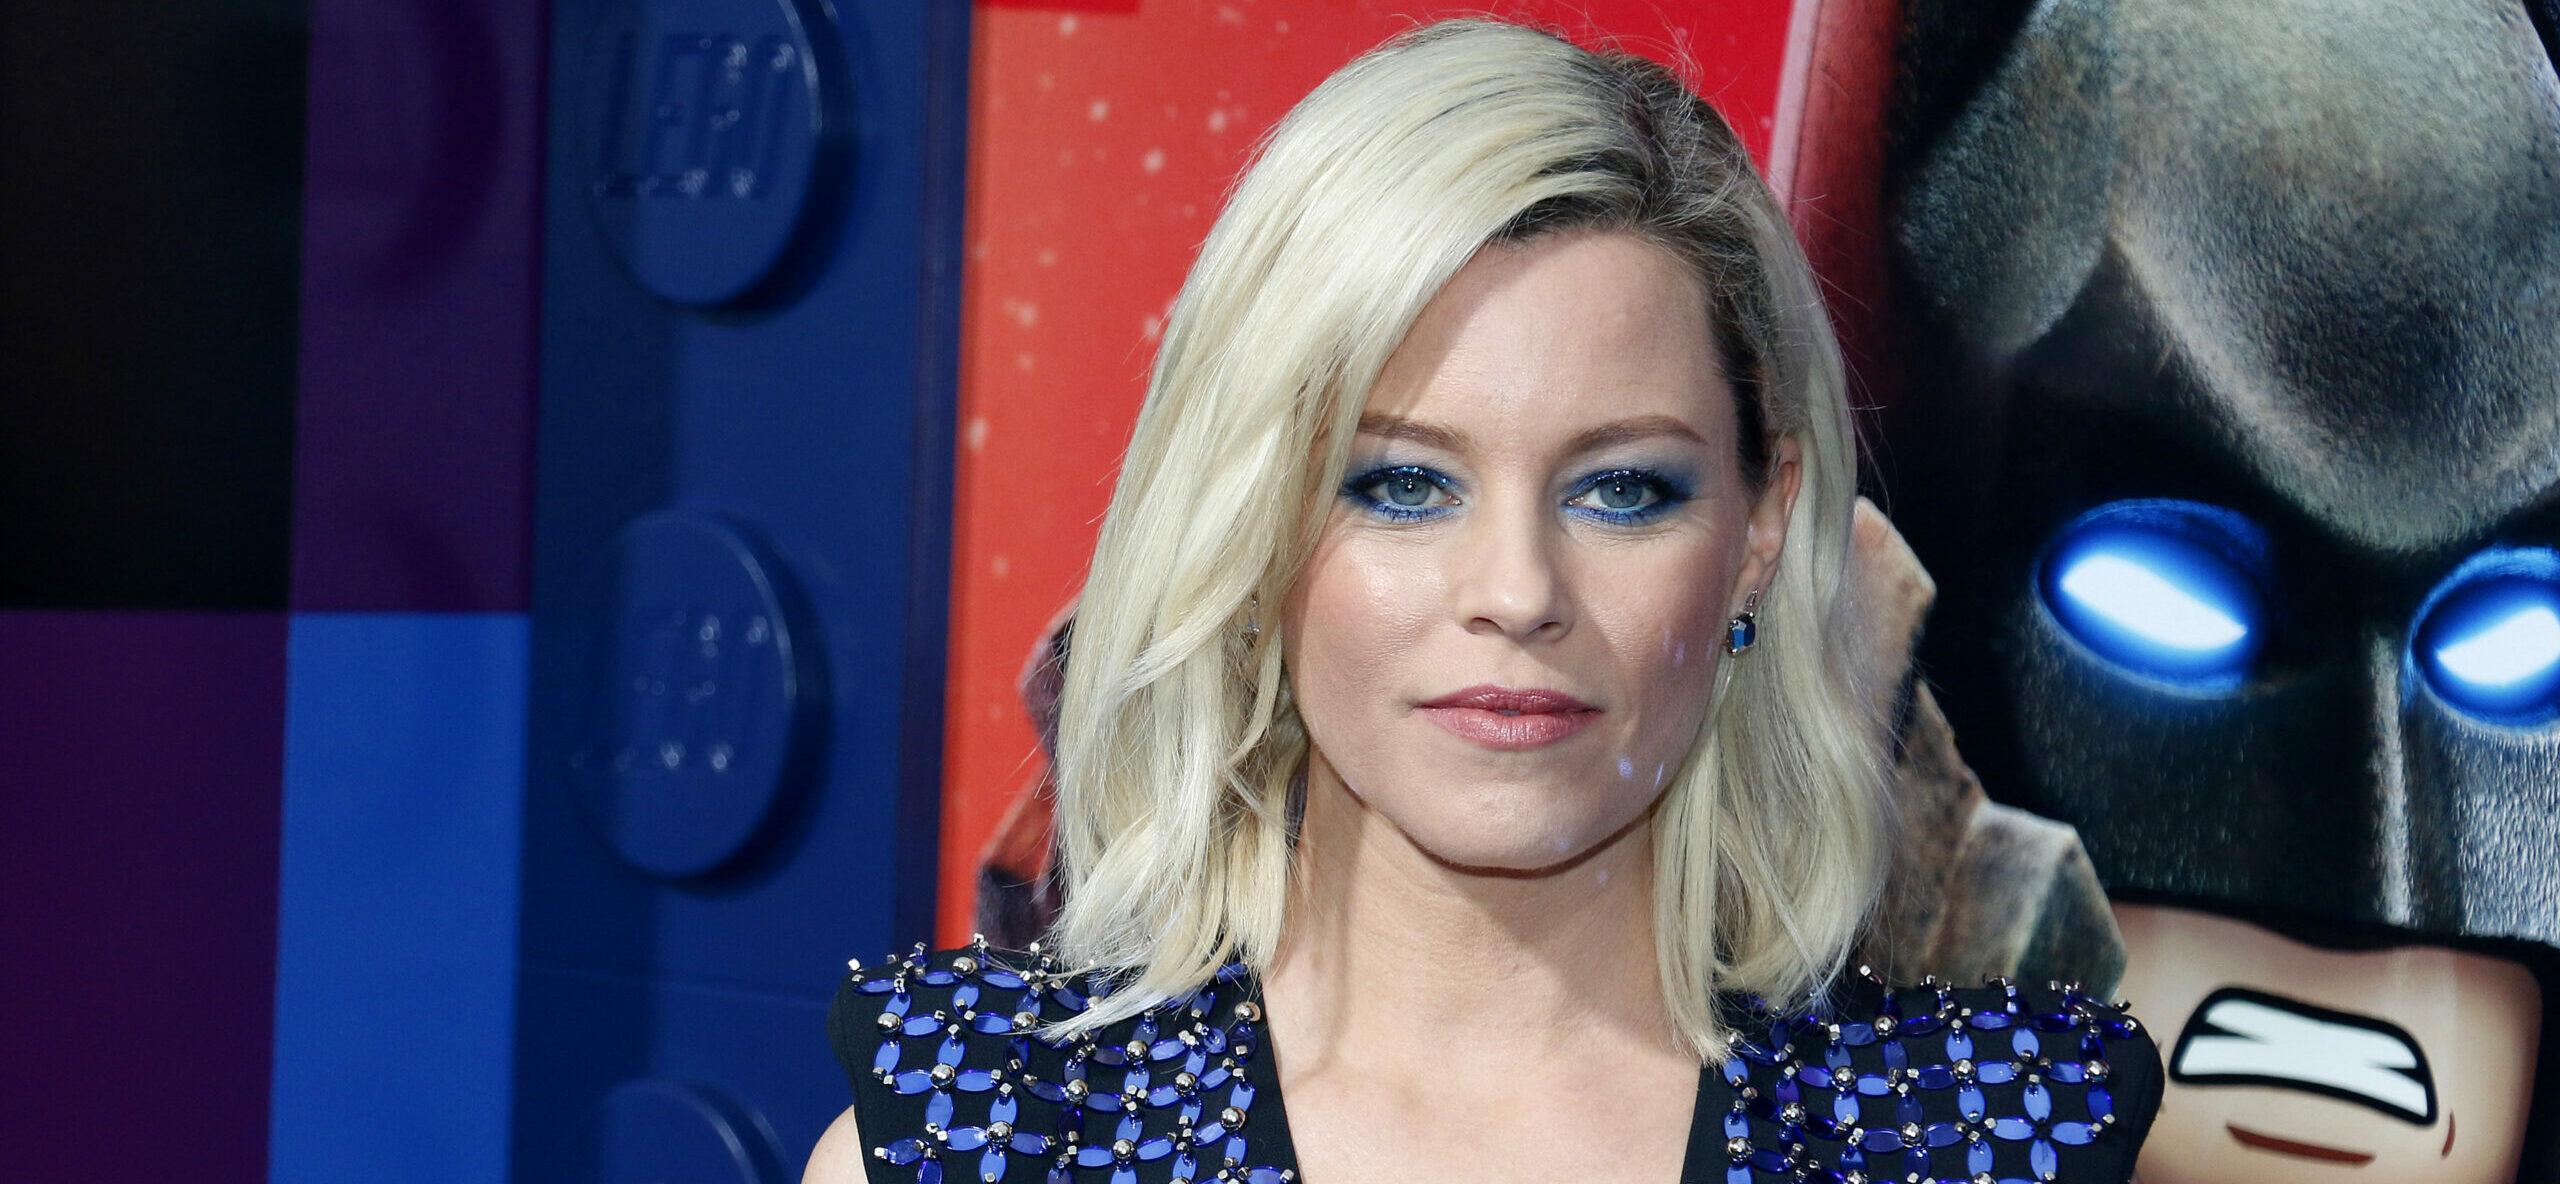 Actress Elizabeth Banks Was Once Encouraged To Do Plastic Surgery